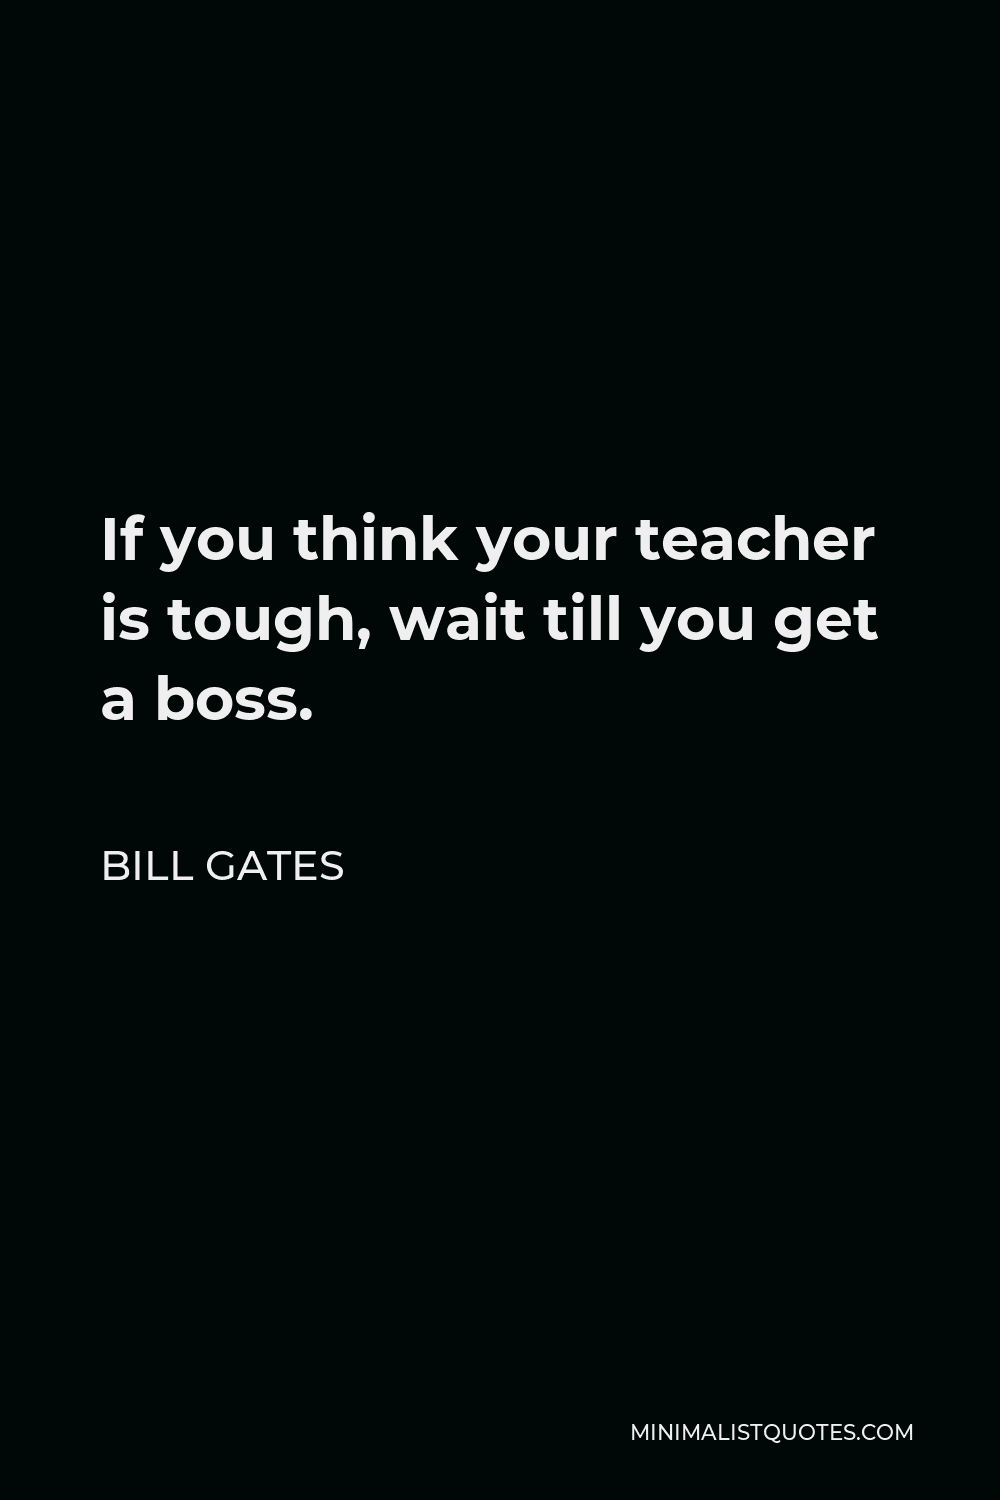 Bill Gates Quote - If you think your teacher is tough, wait till you get a boss.